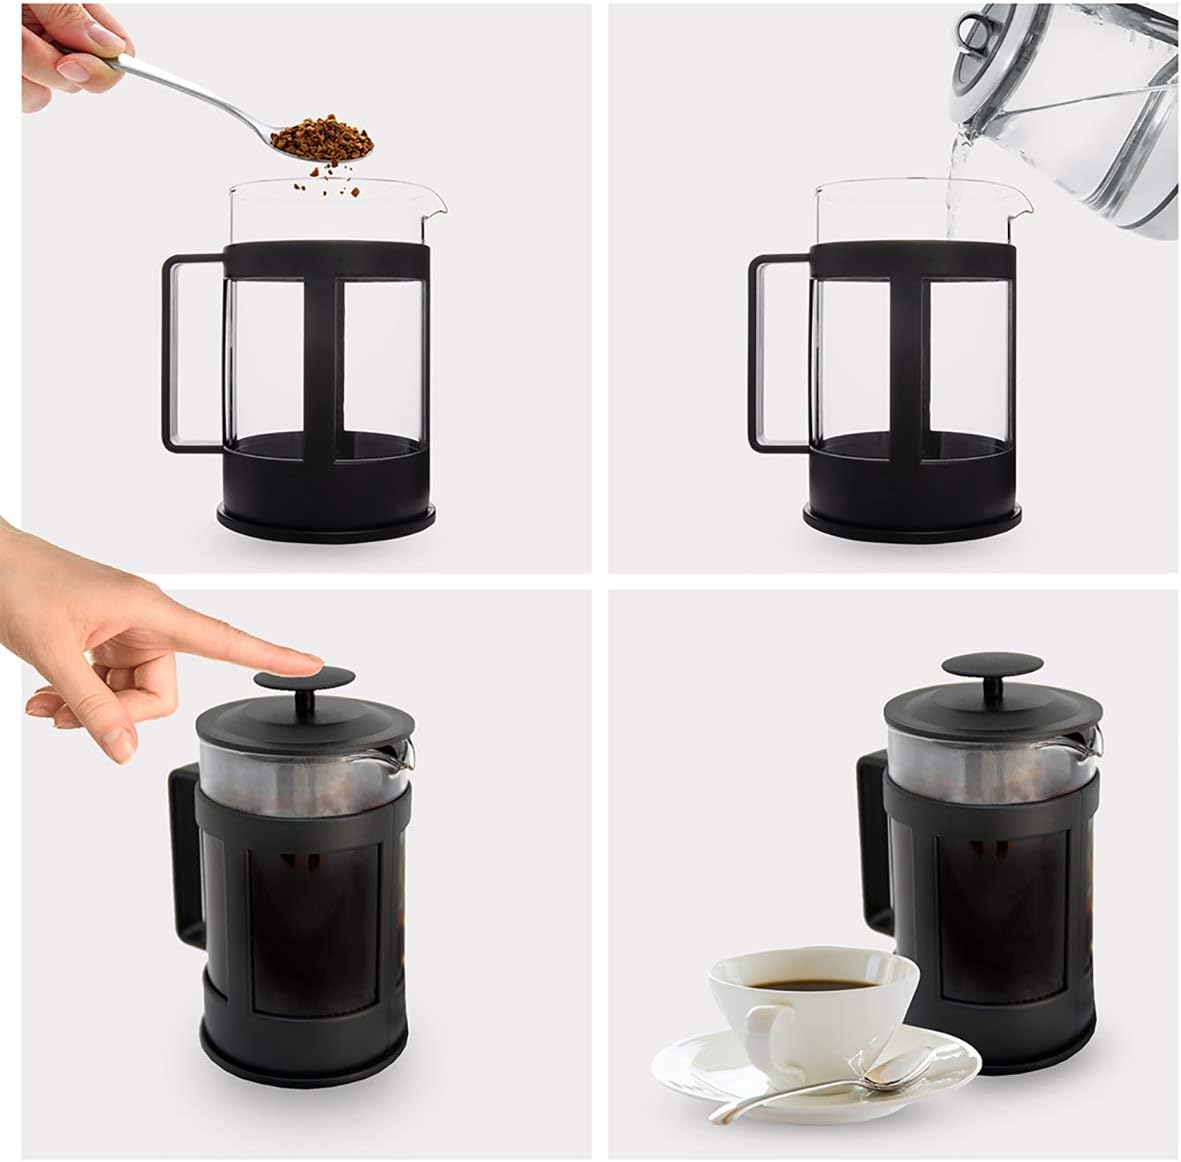 Biggcoffee French Press Fresh Coffee Maker, Stainless Steel Lid, Borosilicate Glass, 350 Ml,Compact Design Speciallly For Coffee Lovers